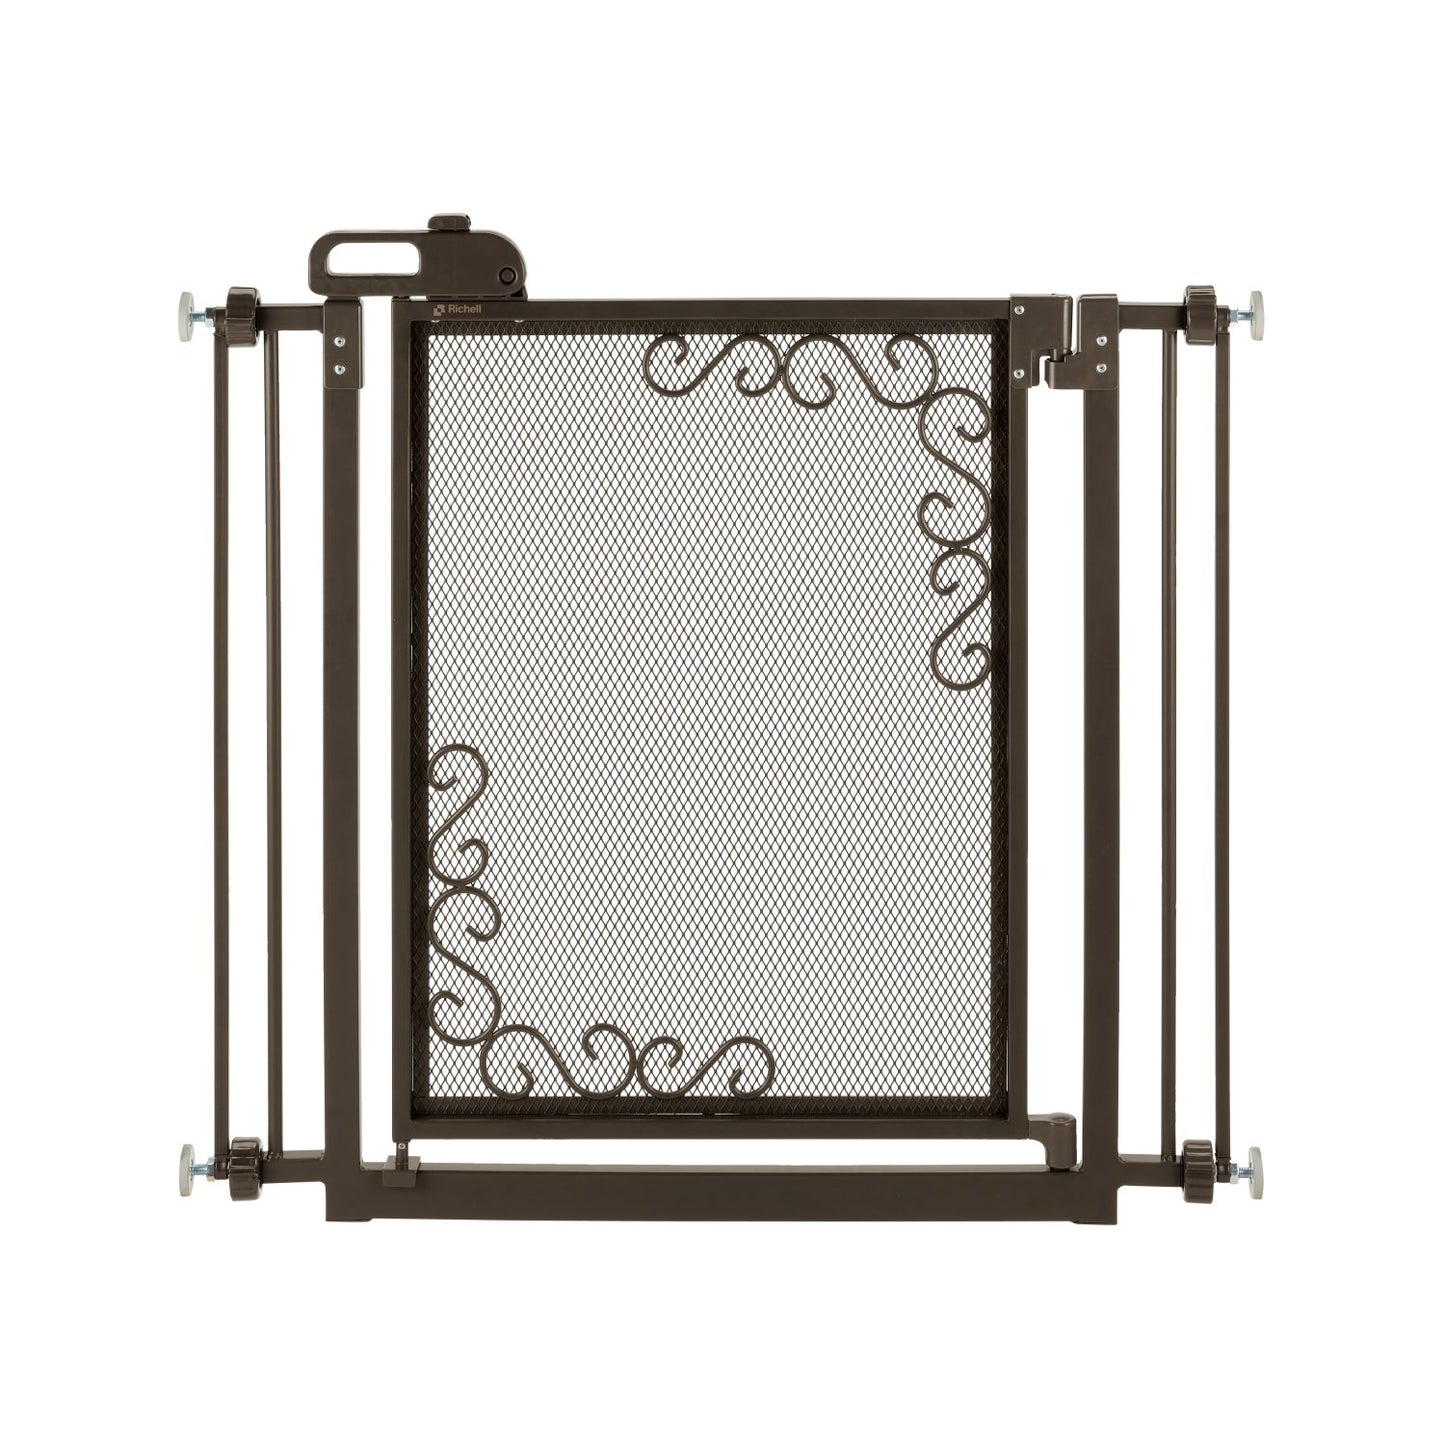 One-touch Metal Mesh Pet Gate In Antique Bronze